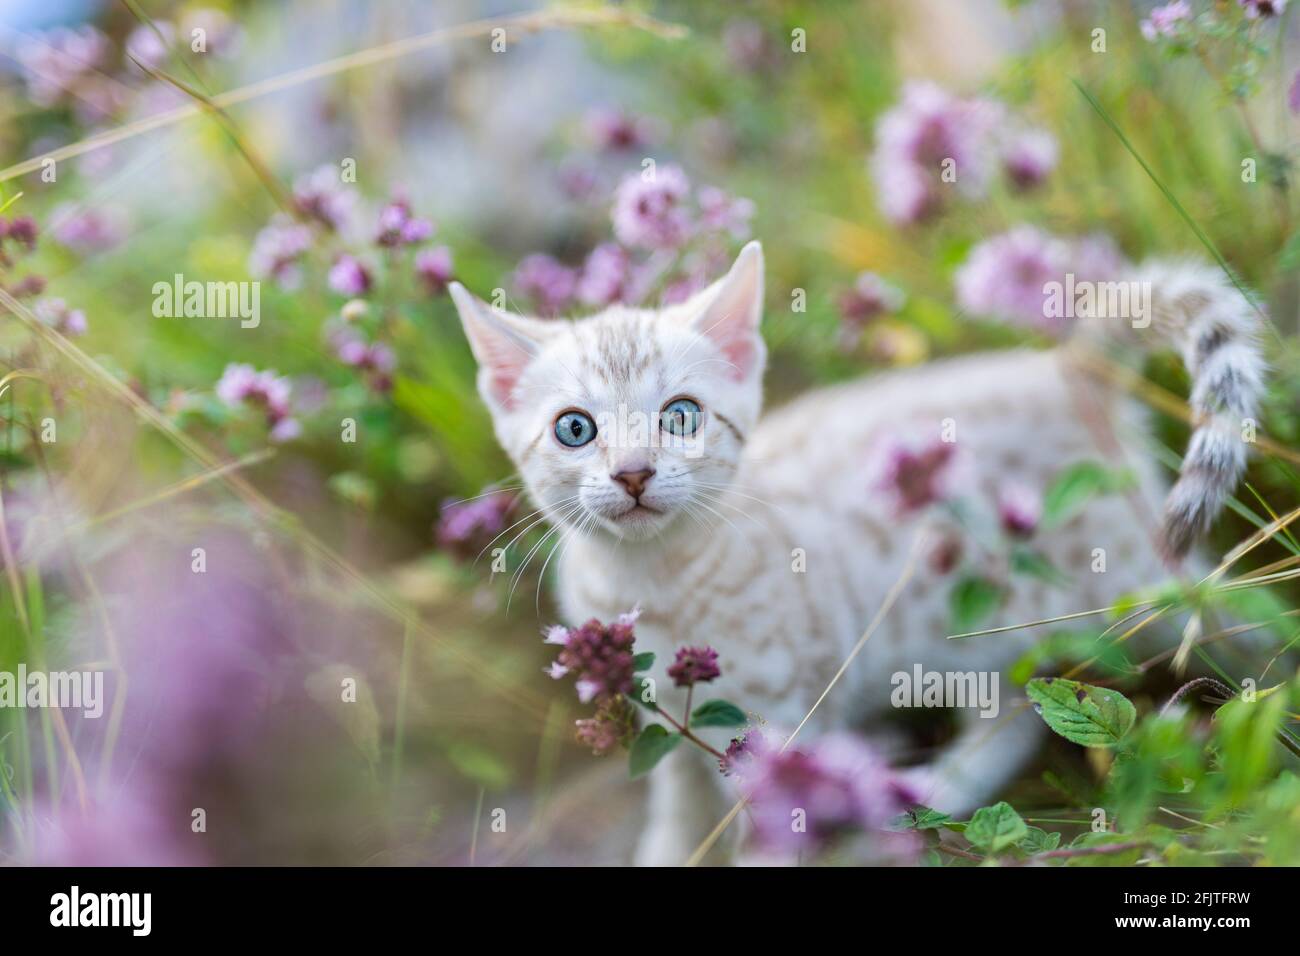 A cute kitten outdoors surrounded by purple flowers. The curious little cat is a white purebred snow bengal cat and she is 7 weeks old. Stock Photo